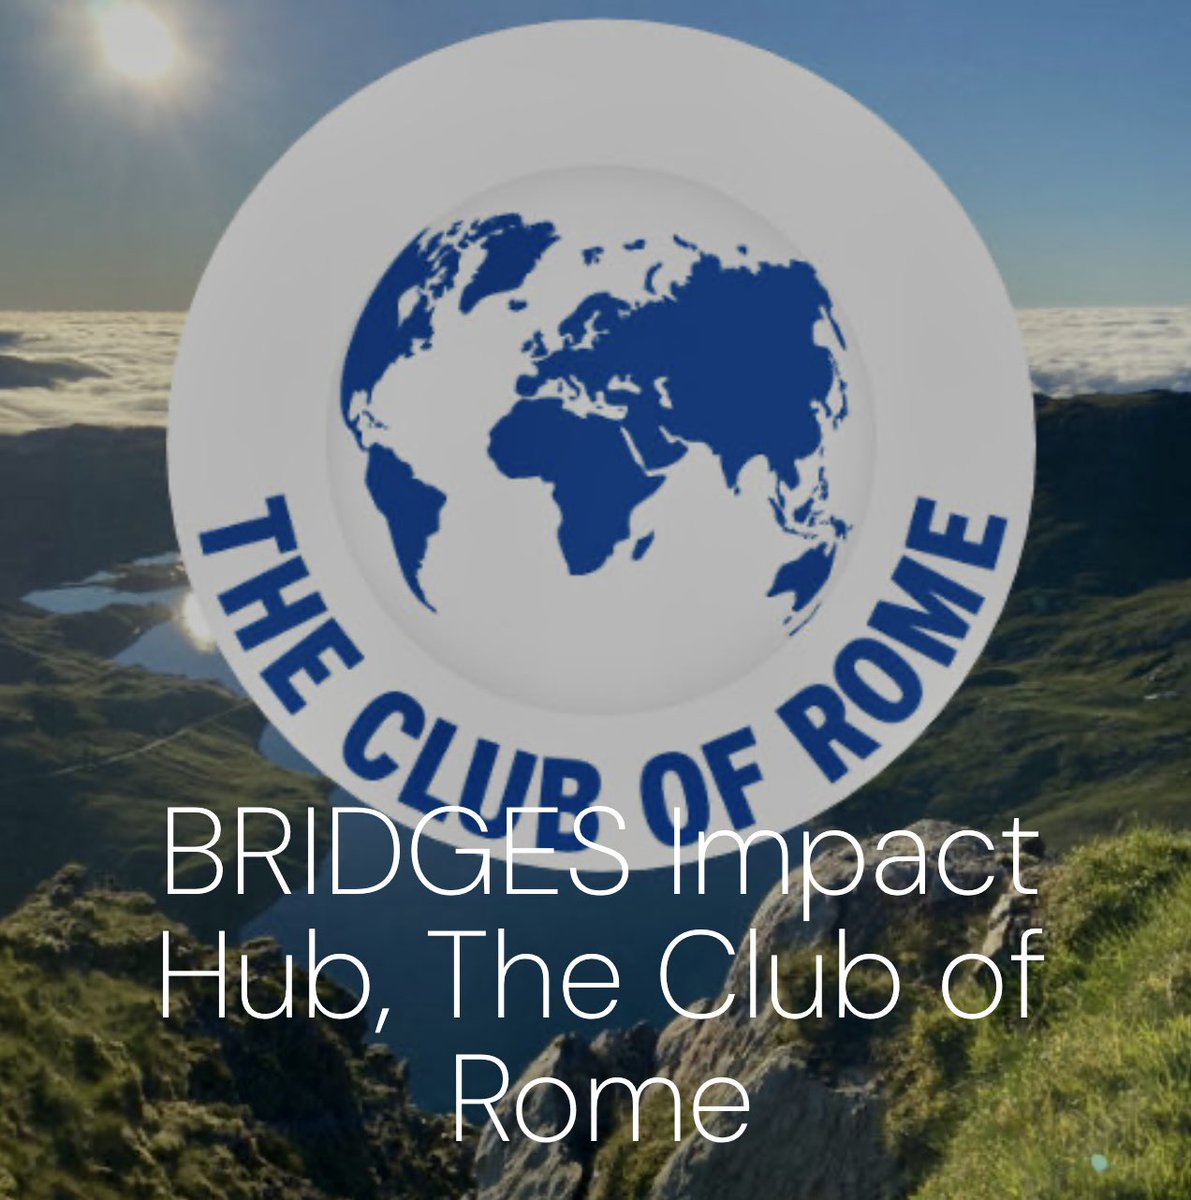 We continue our global hub spotlight series with the UNESCO-MOST BRIDGES Coalition Impact Hub, The Club of Rome. In its contribution to the operational program of BRIDGES, @ClubOfRome brings valuable implementation capacities to the coalition’s mandate. bridges.earth/club-of-rome/